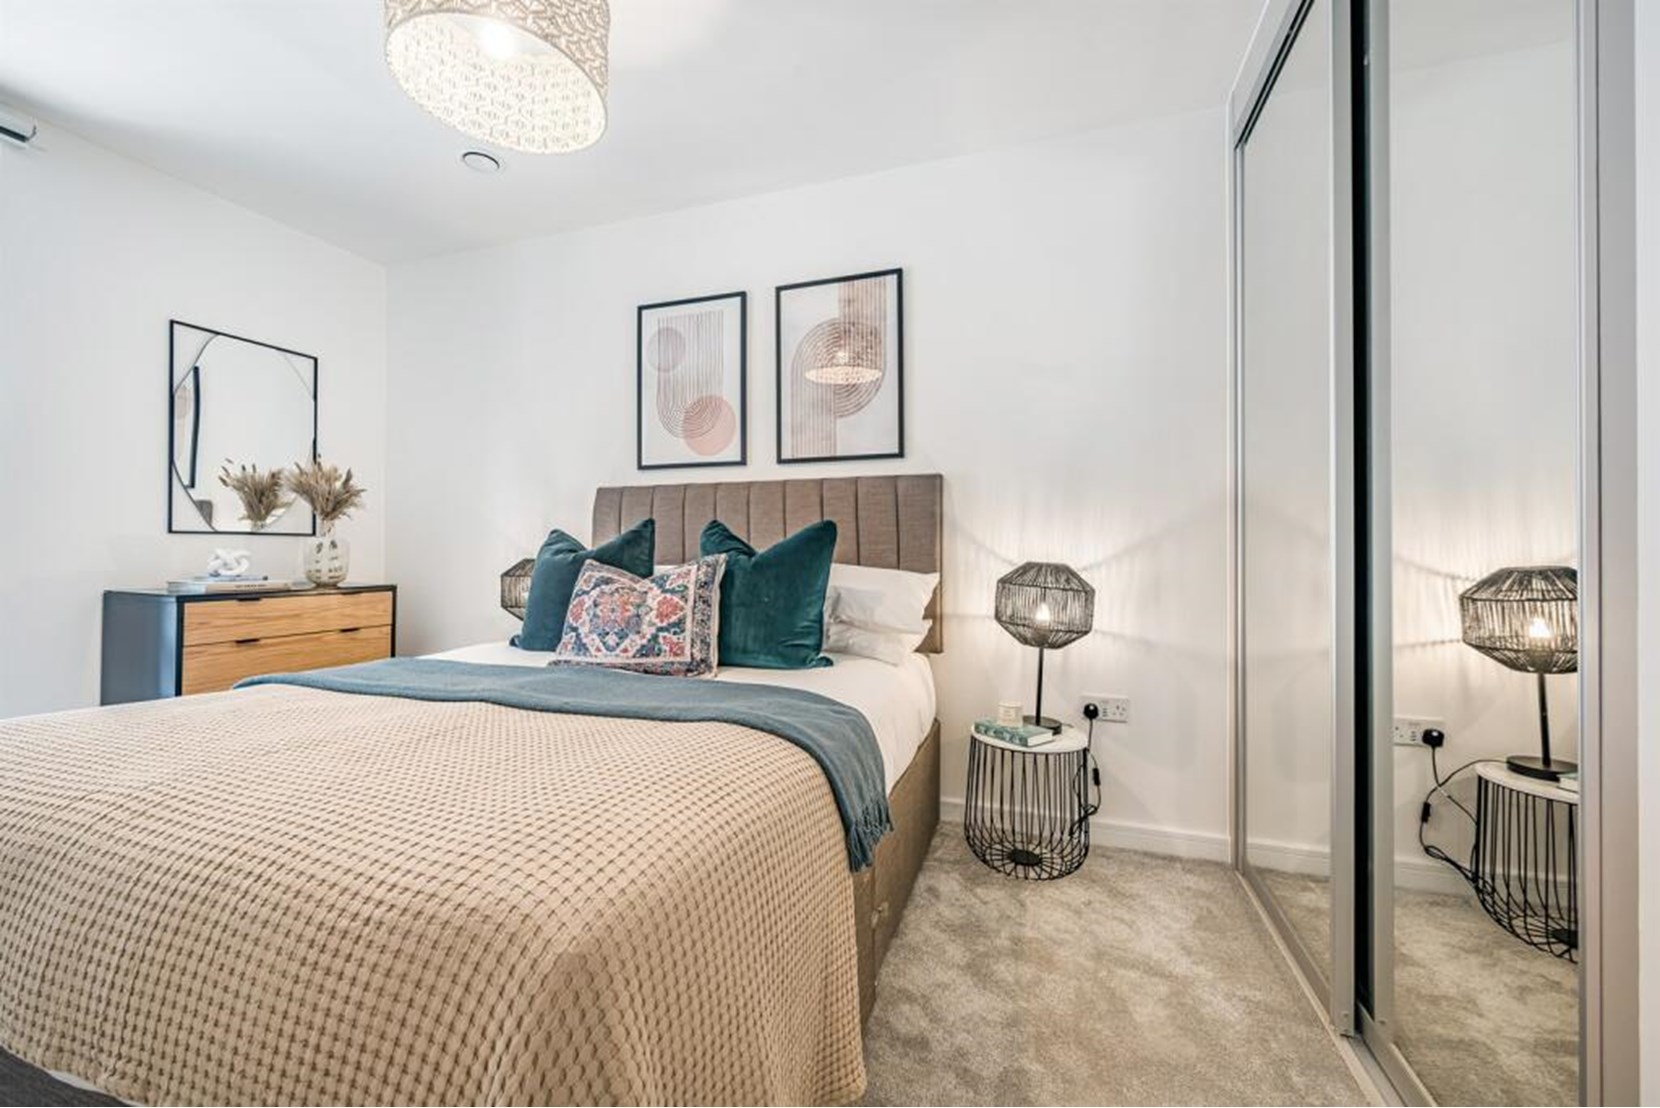 Apartments to Rent by Simple Life London in Elements, Enfield, EN3, The Argon bedroom